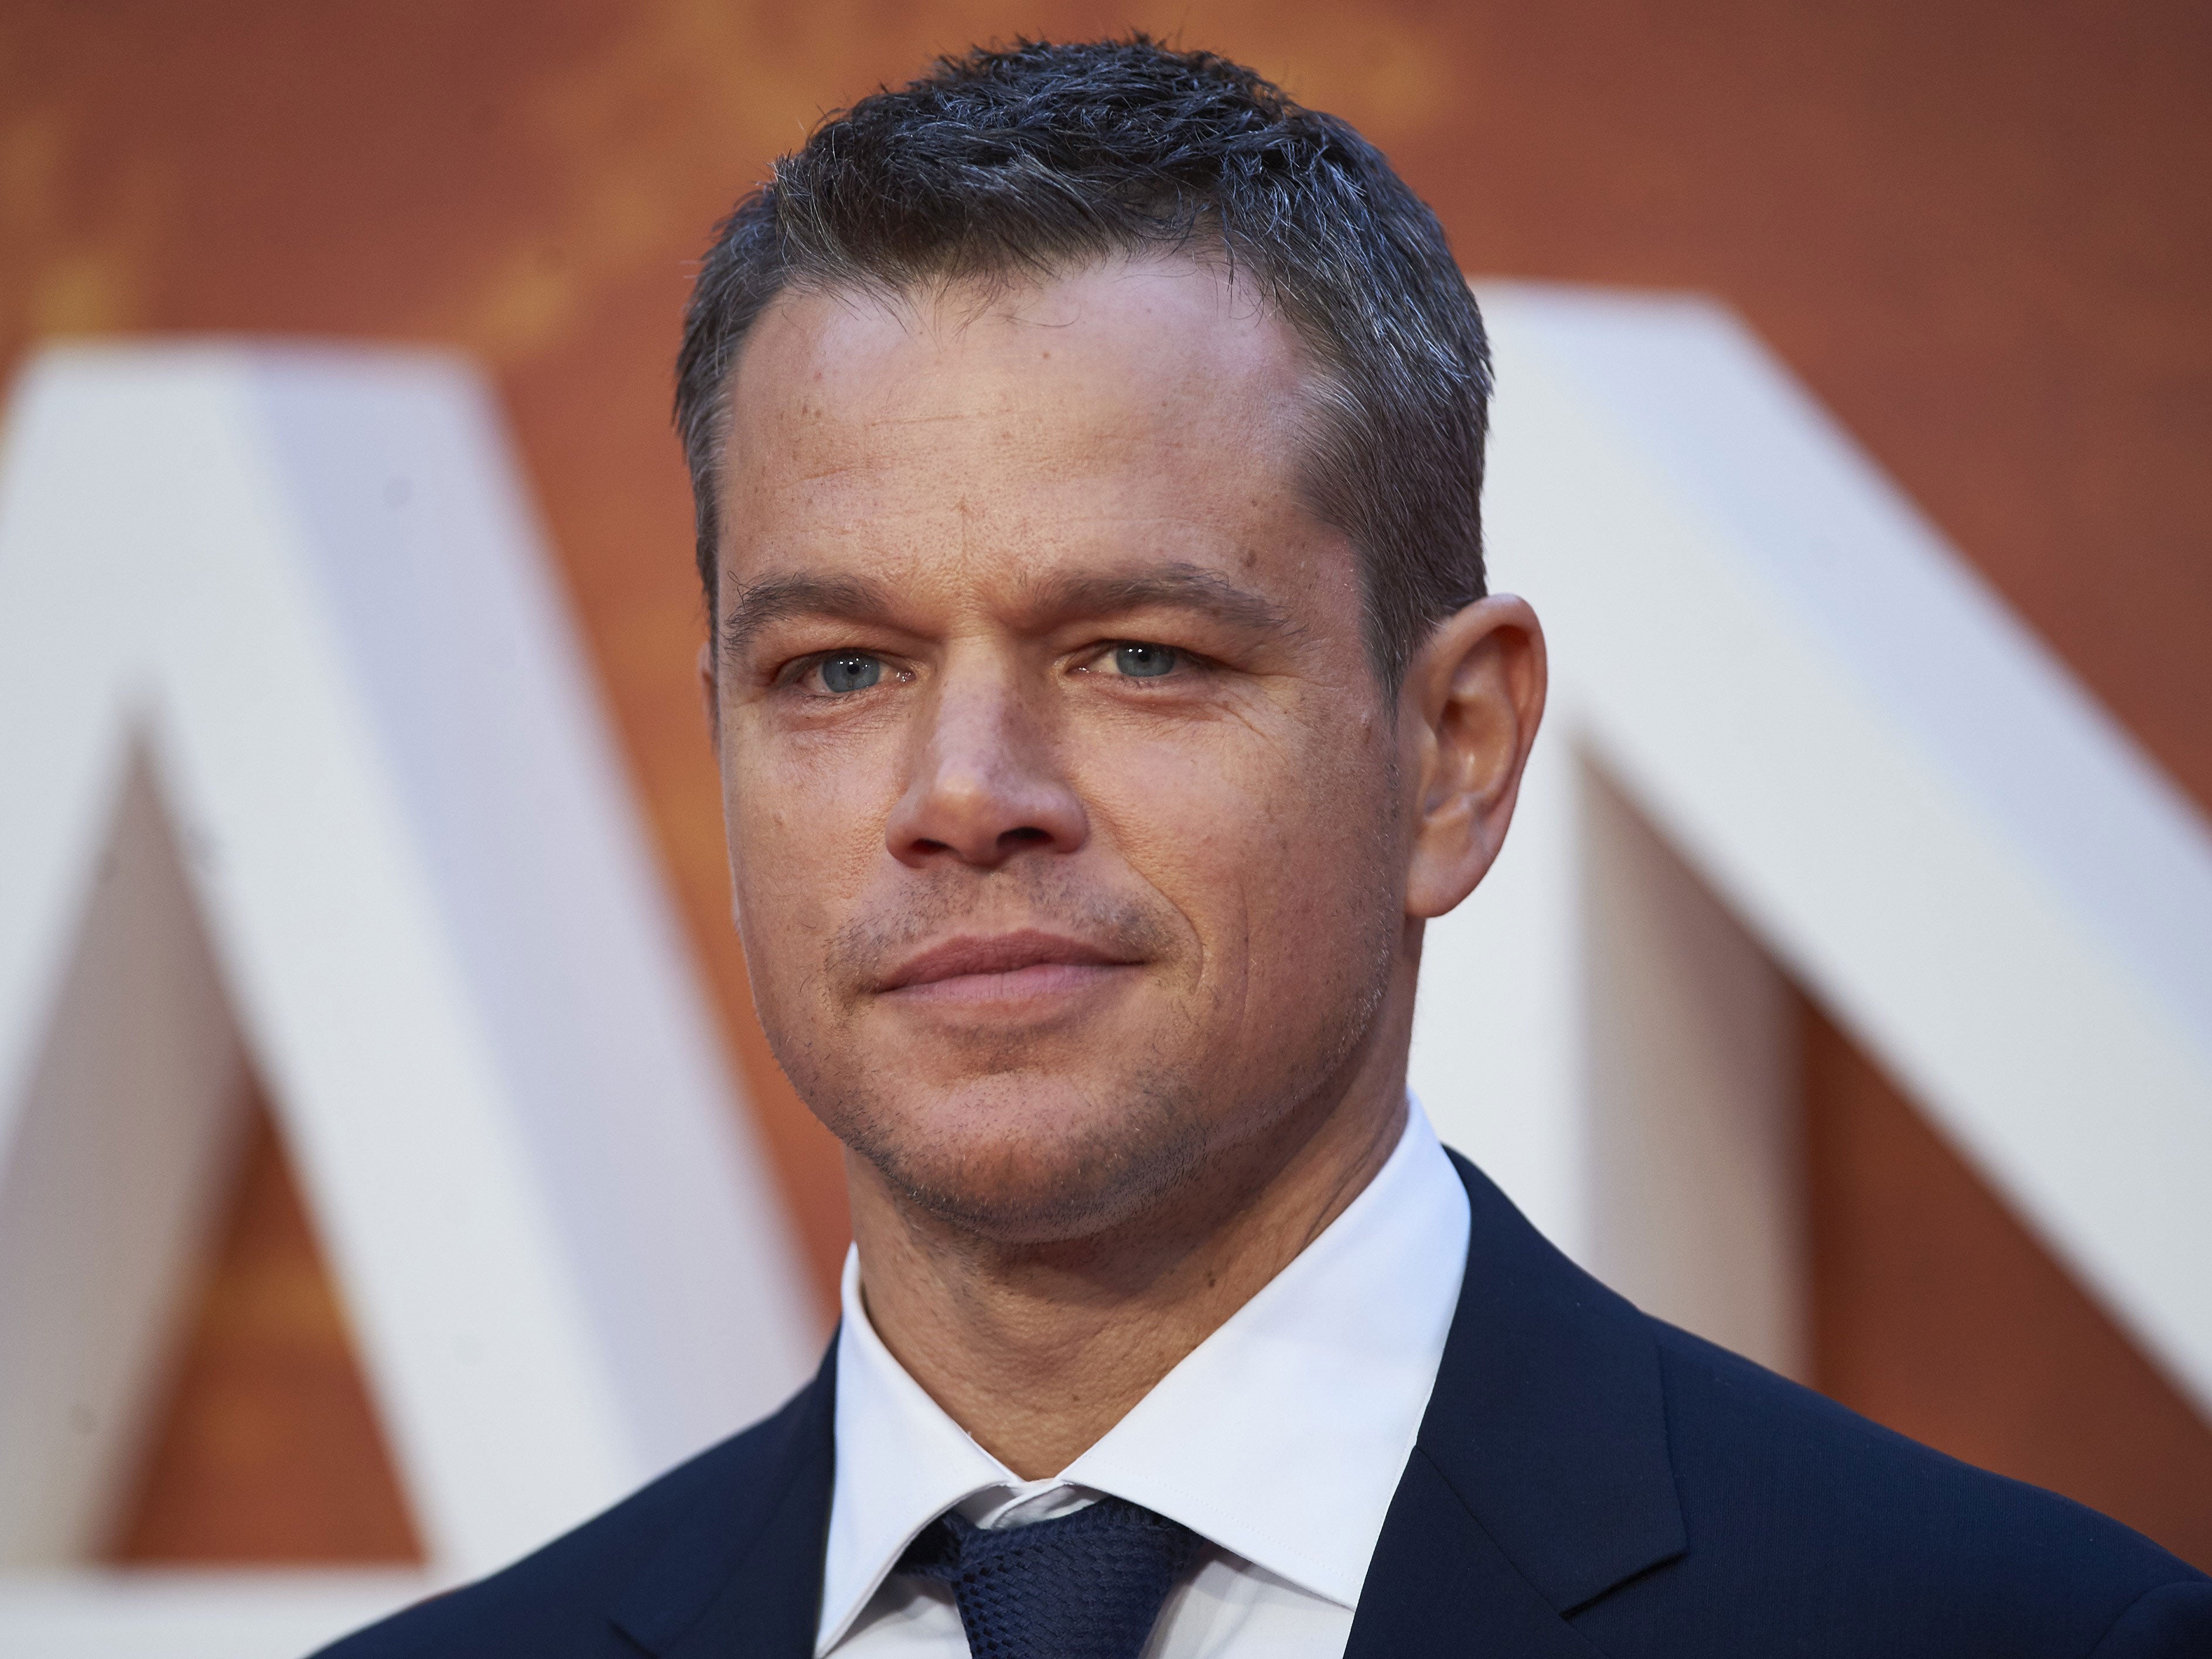 Matt Damon is known for films including the Bourne series